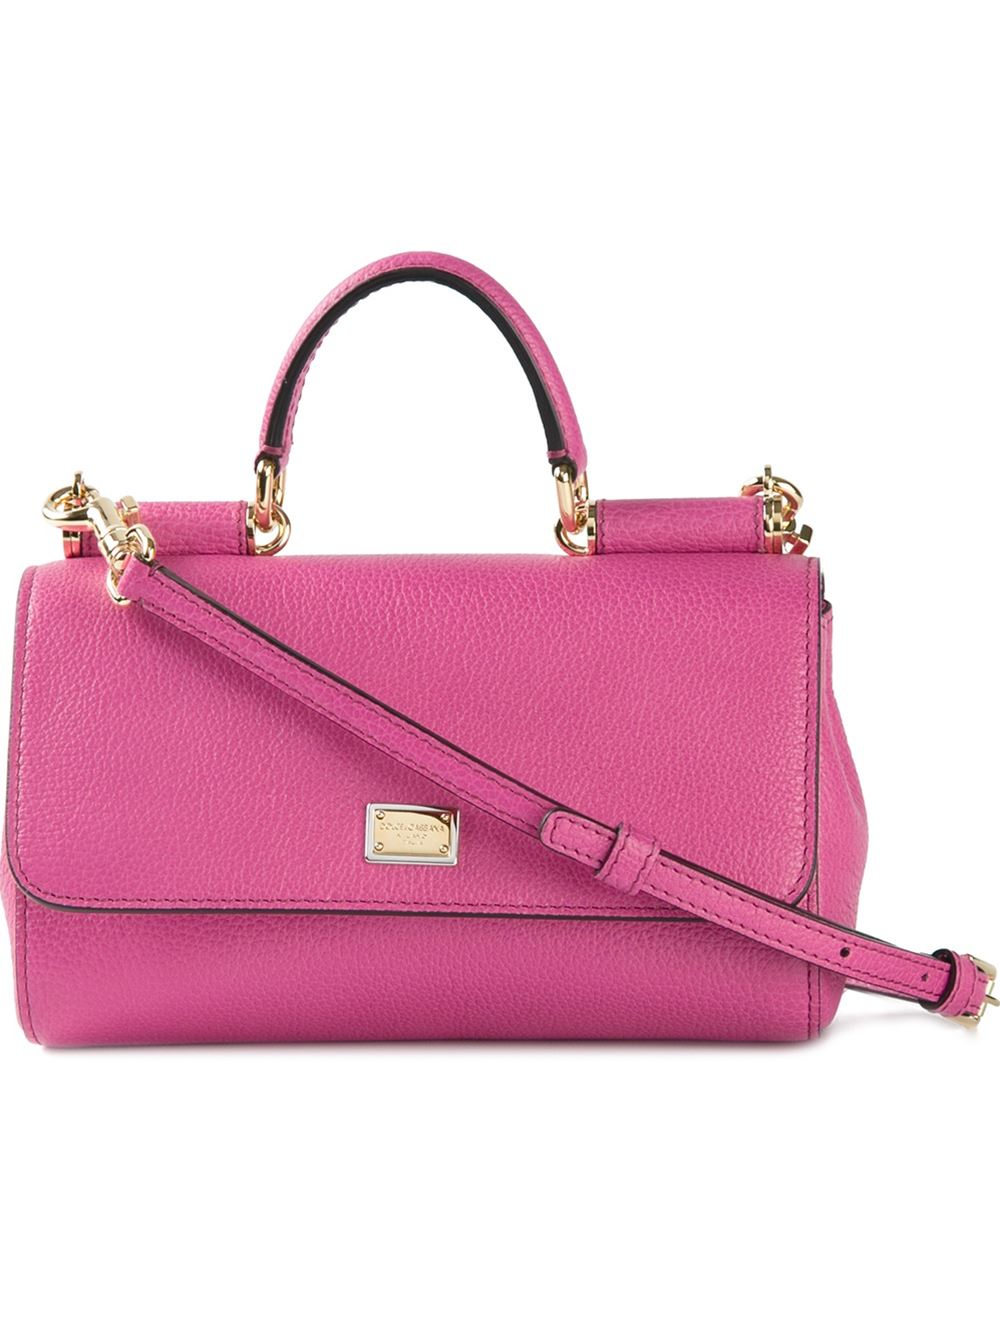 Lyst - Dolce & gabbana Miss Sicily Small Calf-Leather Shoulder Bag in Pink